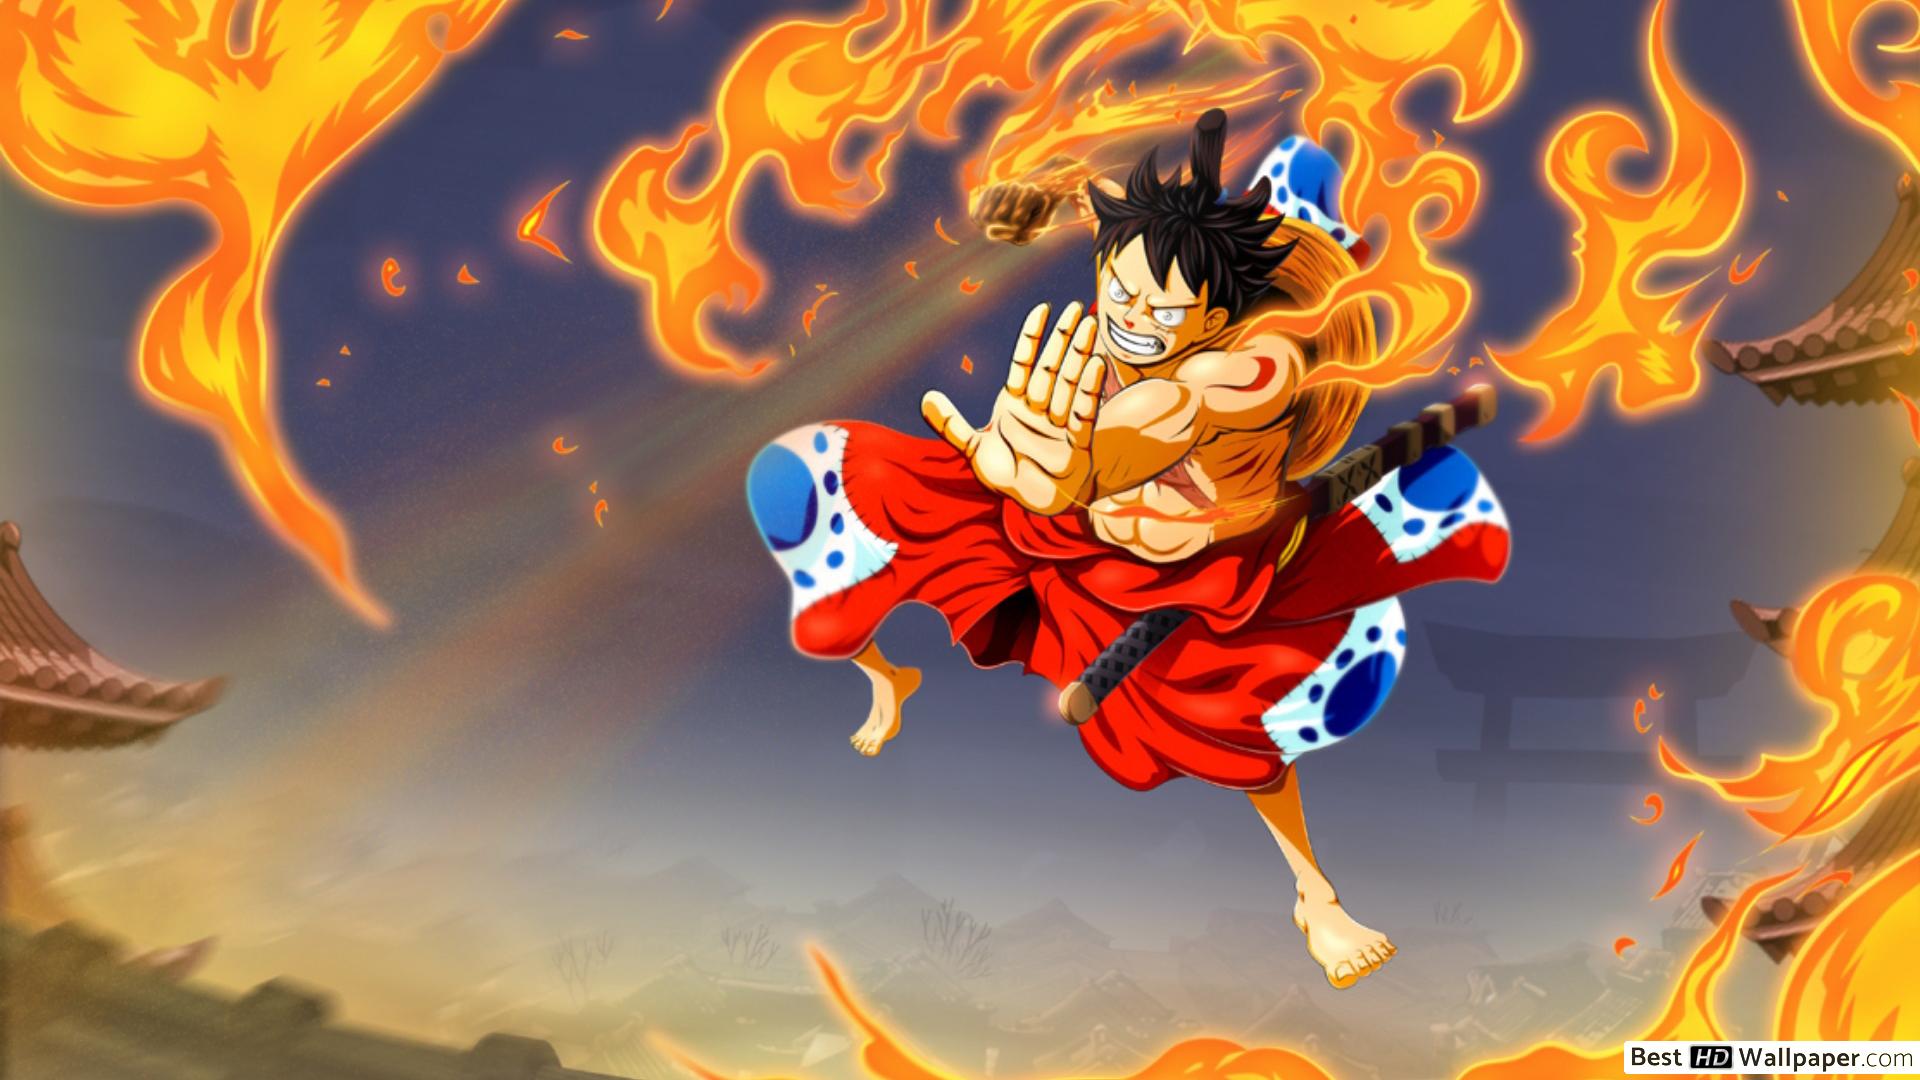 Dual Monitor Wallpaper One Piece , HD Wallpaper & Backgrounds